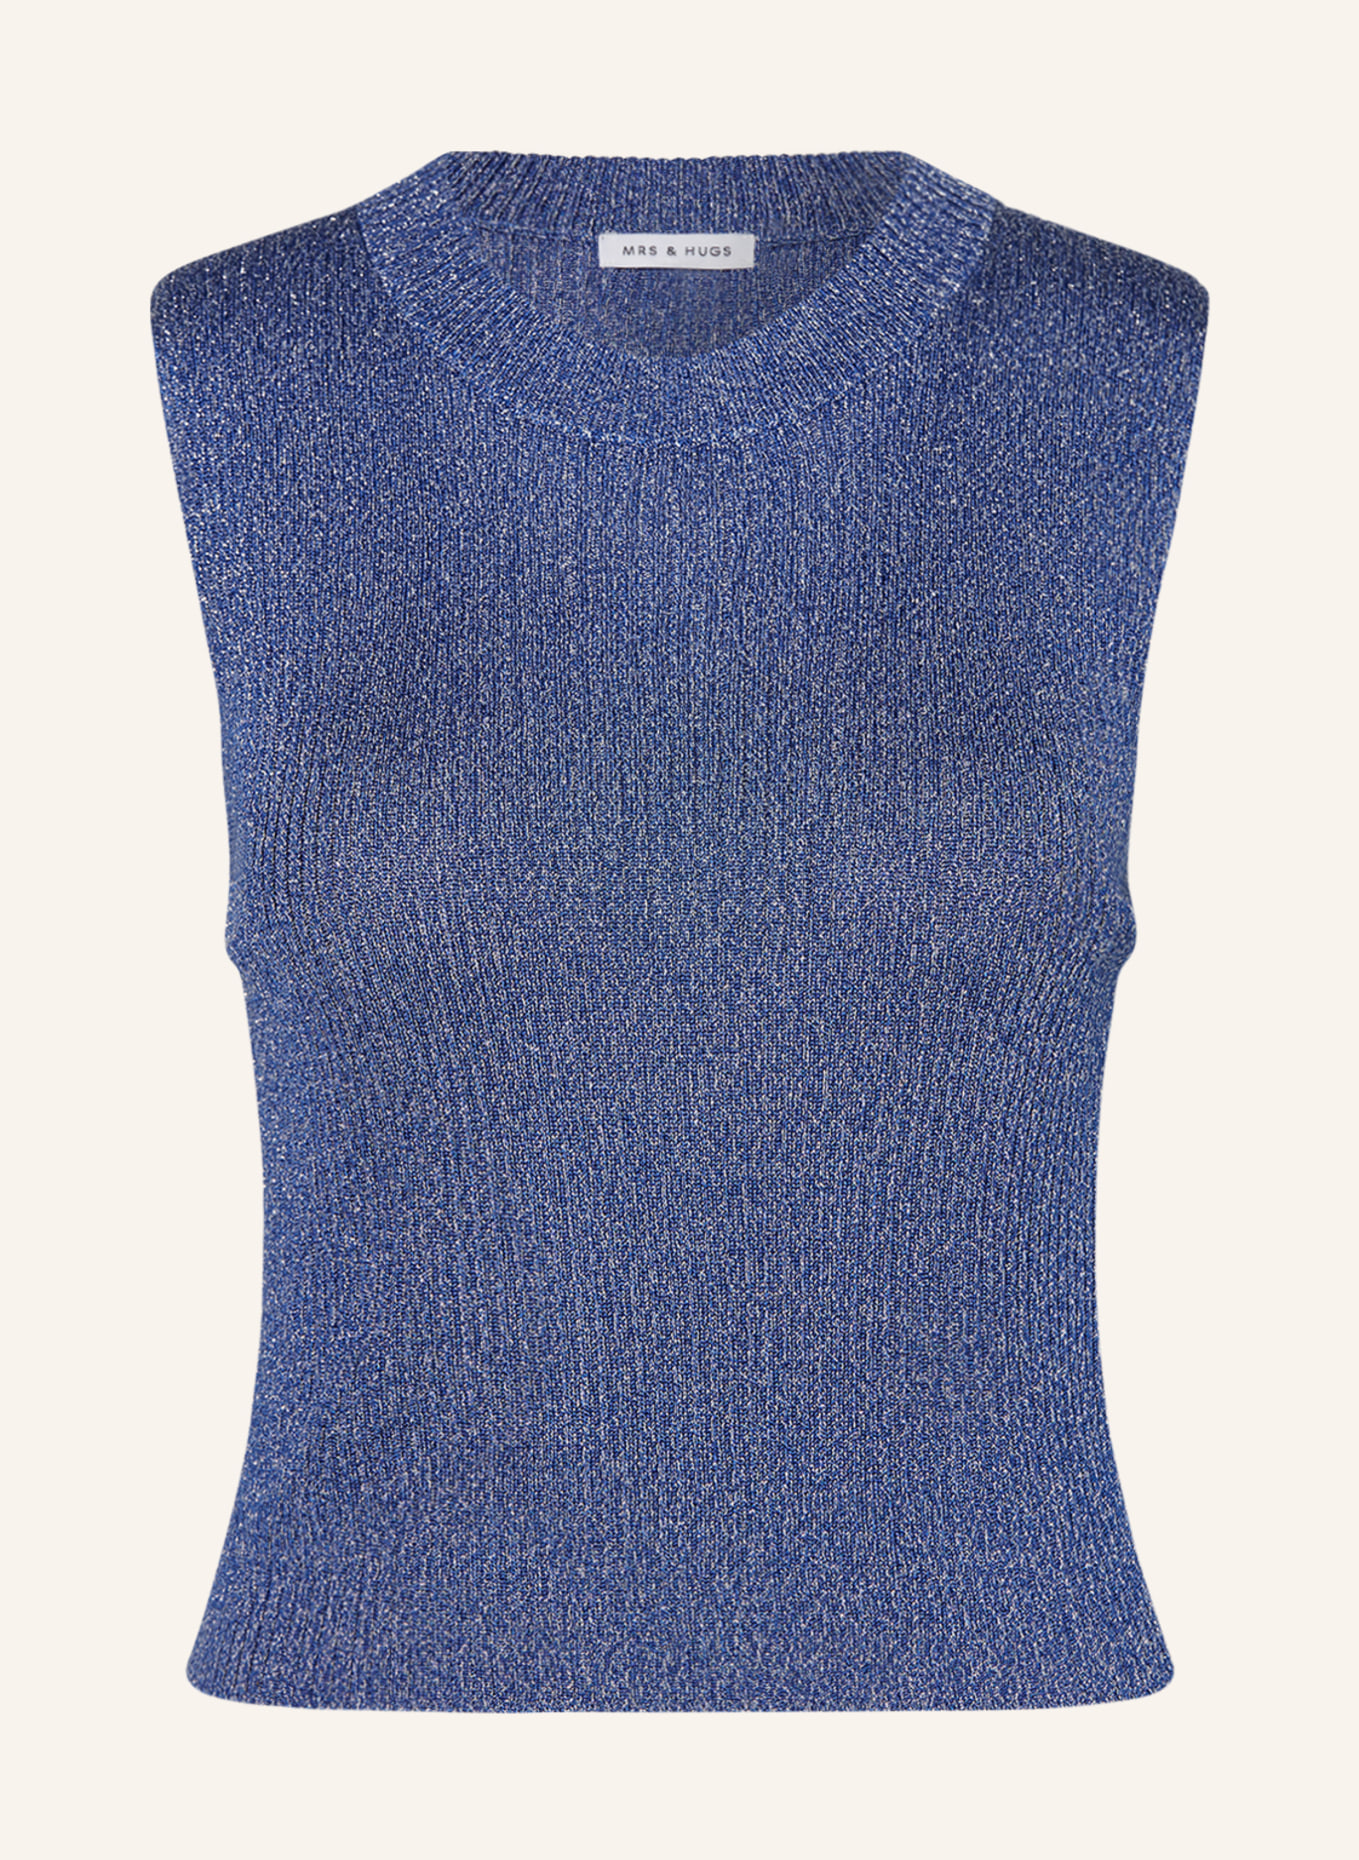 MRS & HUGS Knit top with glitter thread, Color: BLUE/ SILVER (Image 1)